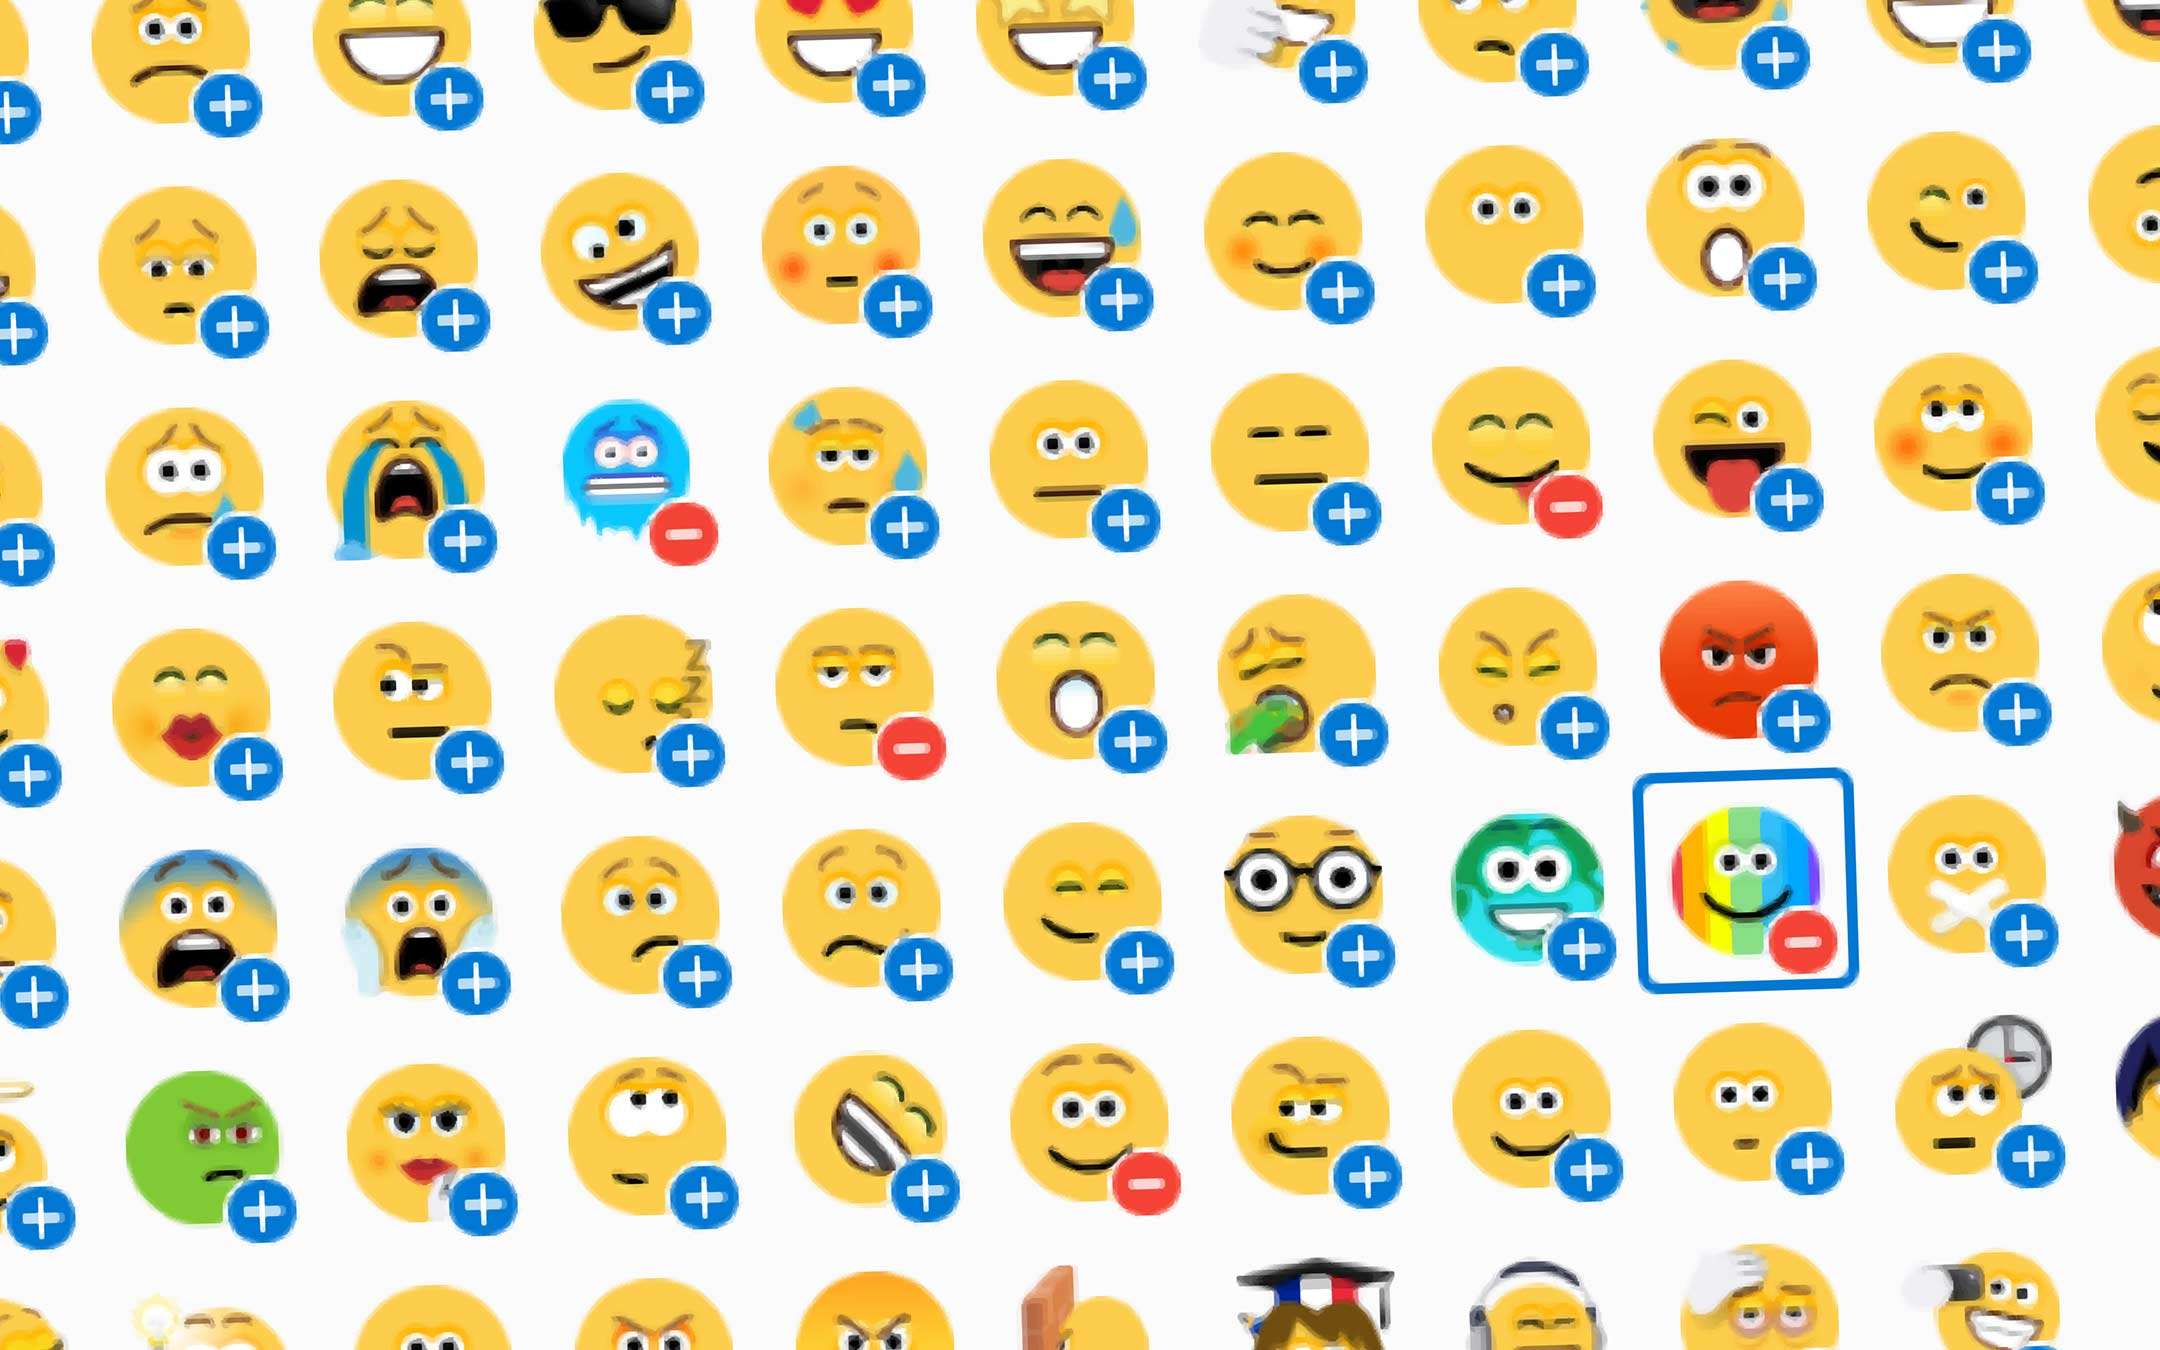 Customize your reactions in Skype chats